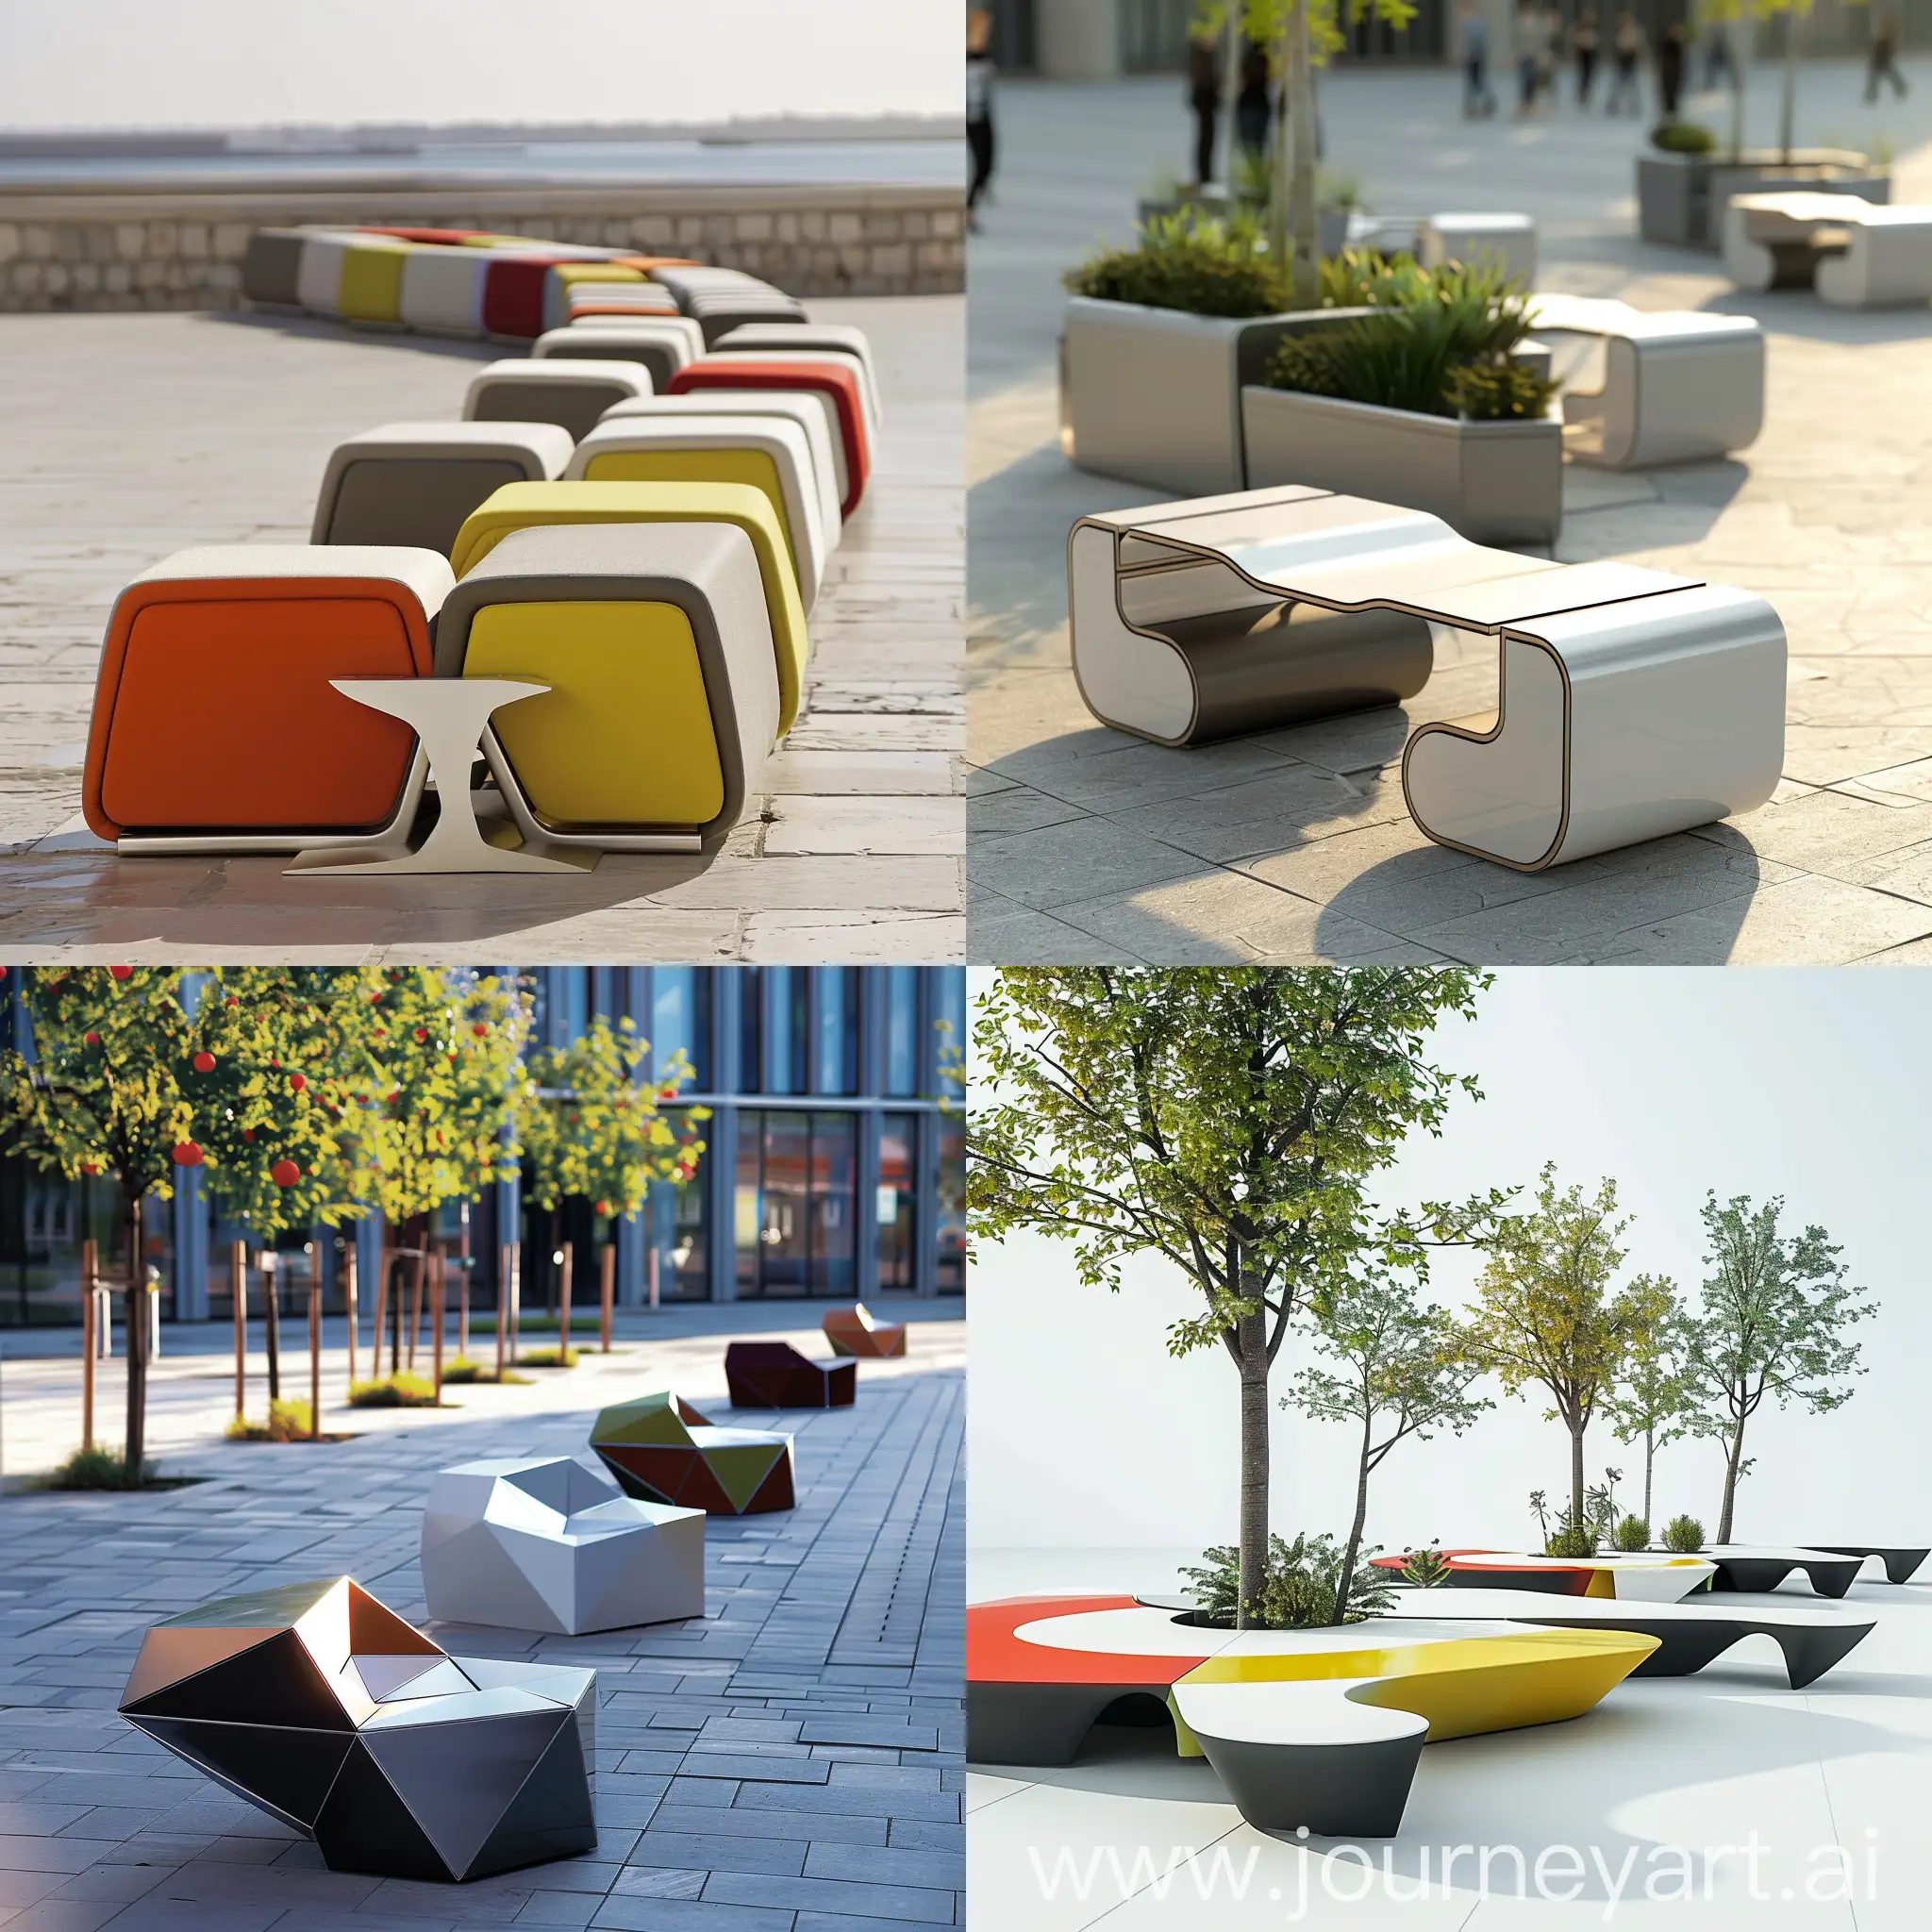 Modular Seating:Design modular seating for urban parks and busy public spaces with a minimalist and Bauhaus-inspired style. The seating should feature geometric forms with clean lines and subtle curves, constructed from stainless steel or powder-coated aluminum. Incorporate modular components measuring 1 meter x 1 meter, with predominantly neutral tones and occasional bright color accents. The design should be flexible, allowing for various configurations, and include interactive elements like swiveling seats or movable backrests to engage younger users. The seating should be durable, easy to maintain, and suitable for global use.                                       
Form & Shape:Geometric, clean lines with occasional subtle curves for a playful touch.
Modular components that can be reconfigured to suit various spaces.                                     
Structure:Combination of metal sheets and rods.
Structural integrity through minimalist frameworks and supports.                                          
Dimensions:Standard module size: 1 meter x 1 meter, customizable for different configurations. 
Materials:Stainless steel or powder-coated aluminum for durability and ease of maintenance. Color:Predominantly neutral tones (black, white, grey) with occasional bright color accents (e.g., red, yellow).                                                  Features:Modular Flexibility: Easily reconfigurable to adapt to different needs.
Interactive Elements: Swiveling seats or movable backrests for added engagement.              Location:Various configurations throughout urban parks, plazas, and busy public spaces.